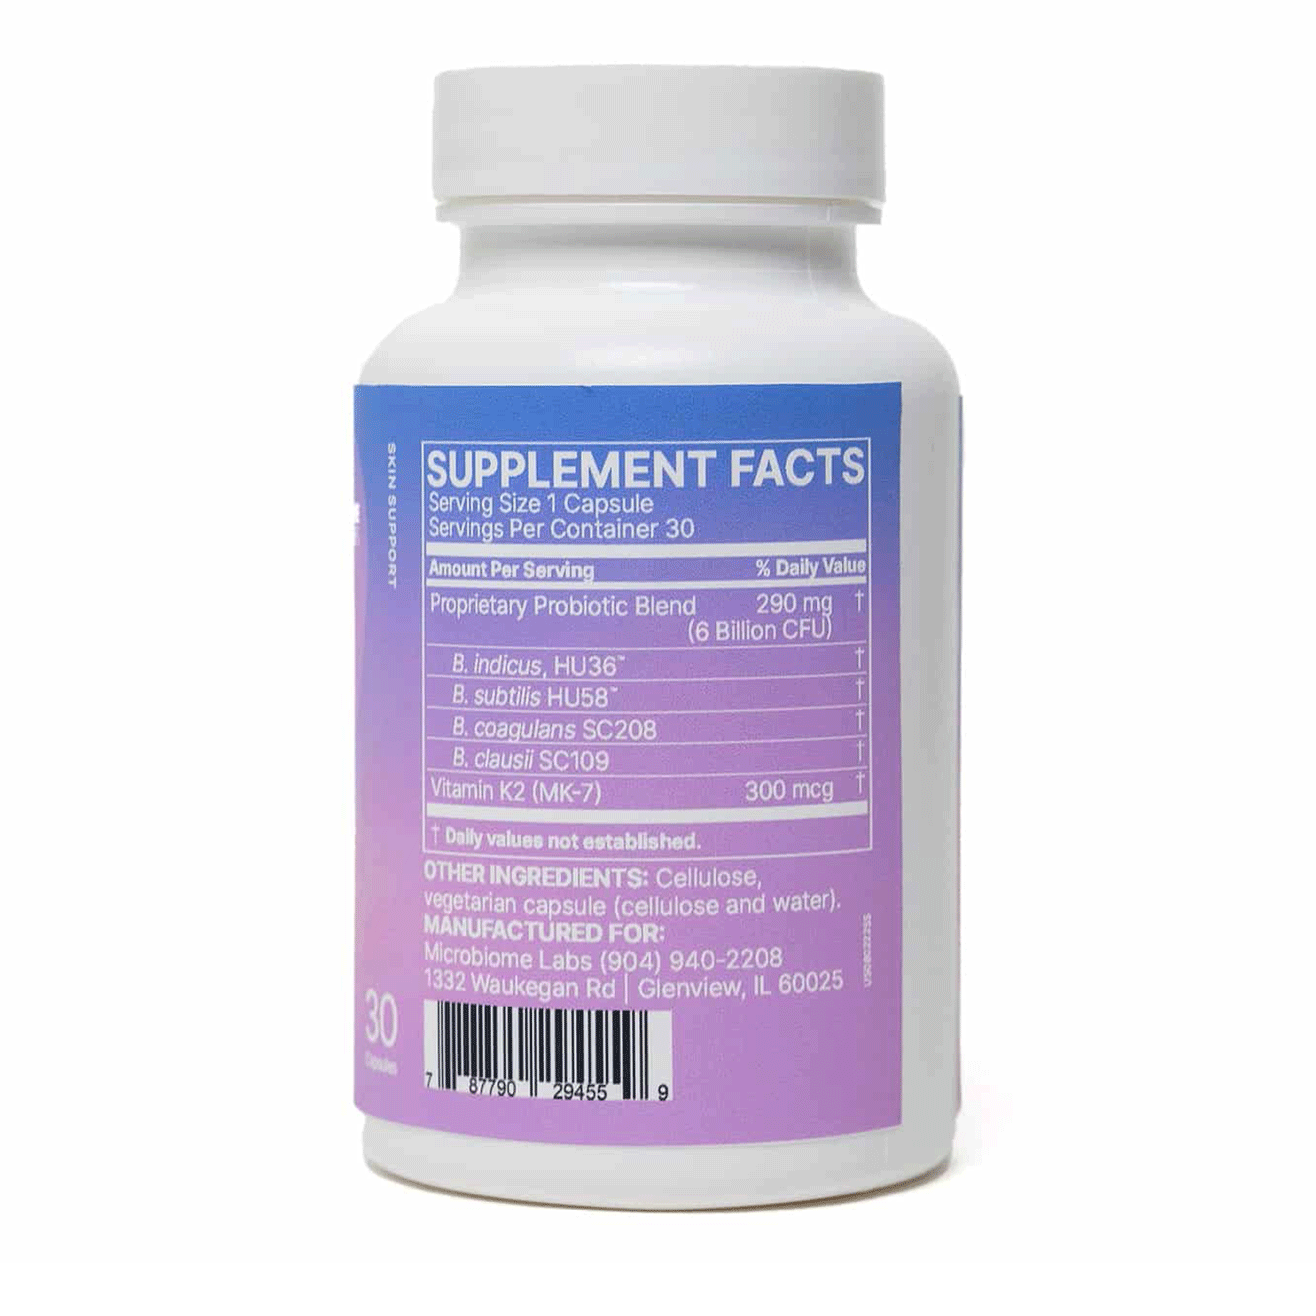 Serene Skin by Microbiome Labs Oral Probiotic Supplement Facts